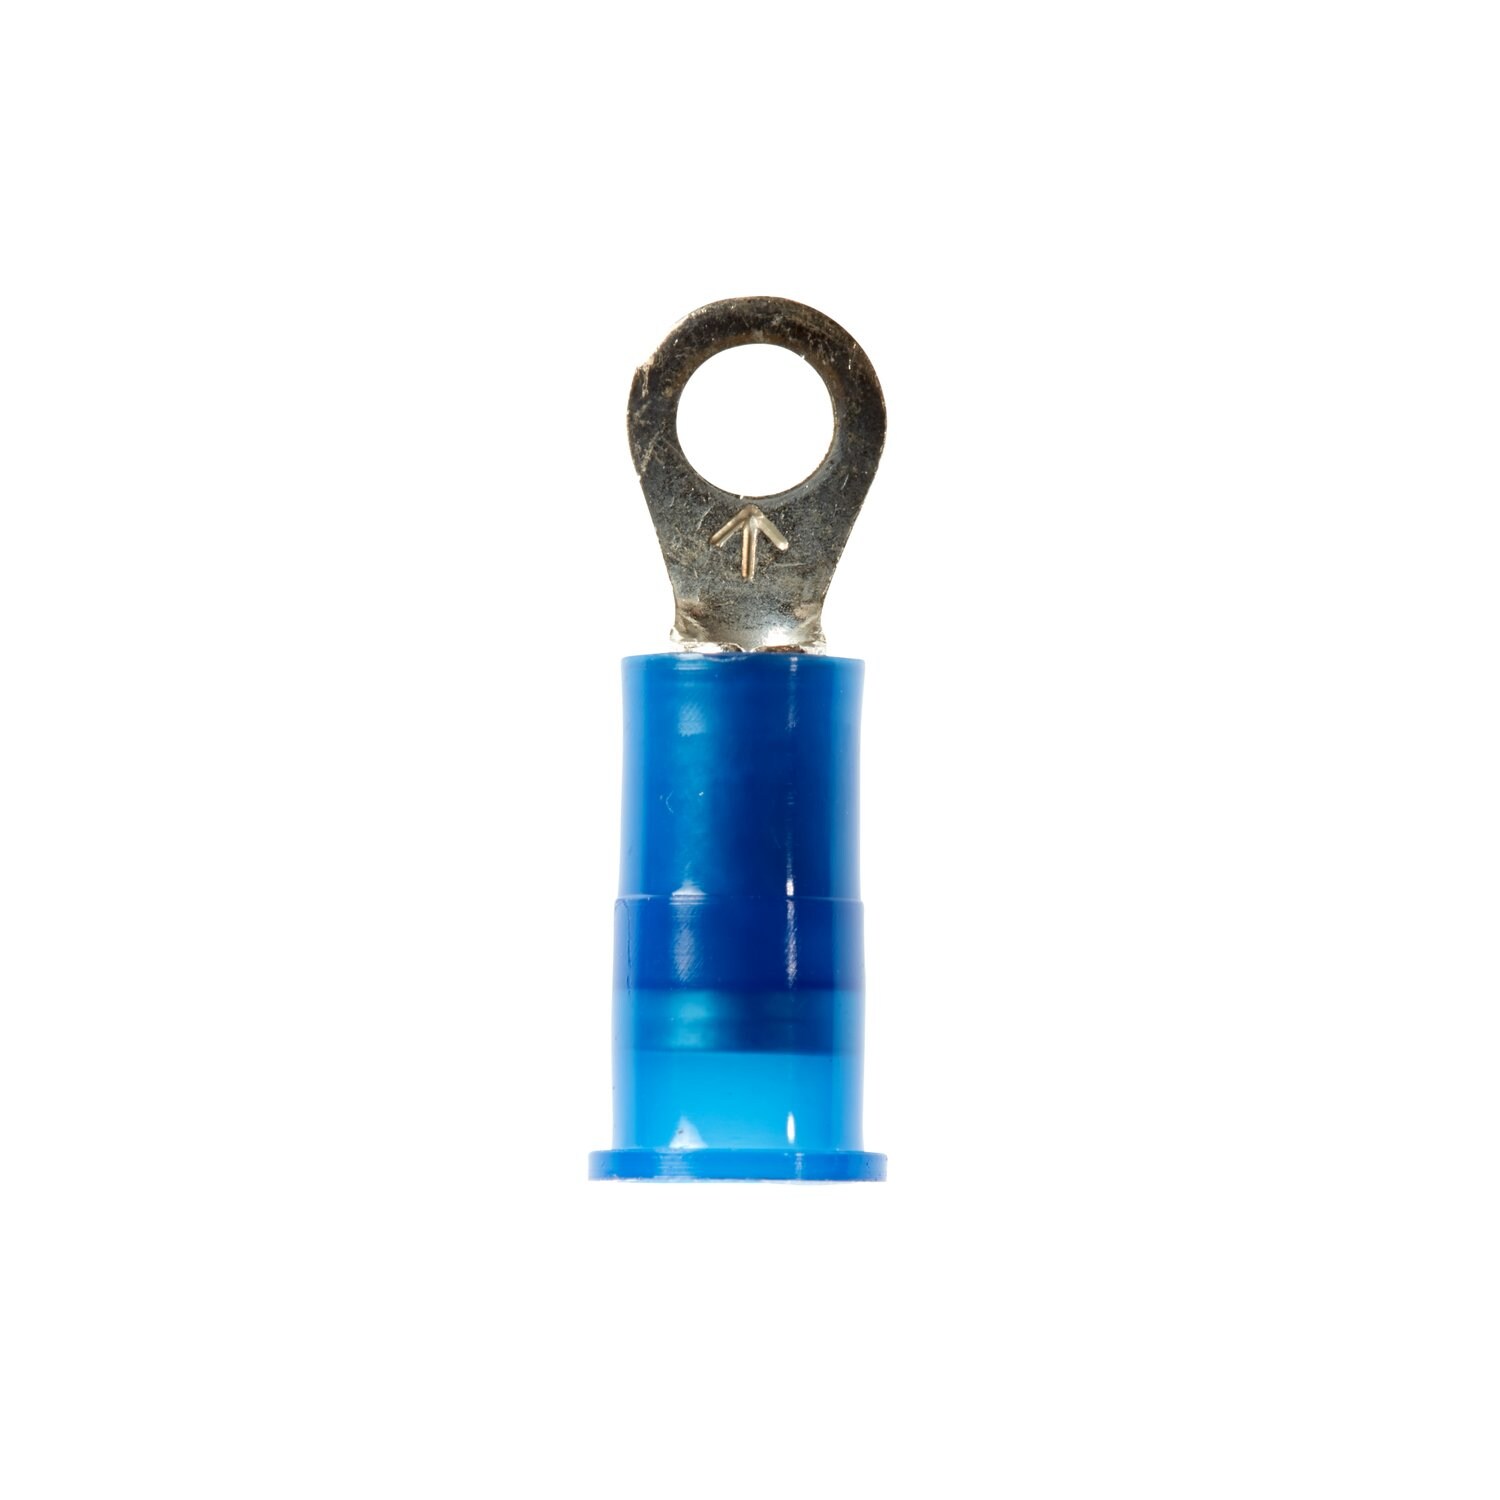 7100164000 - 3M Scotchlok Ring Tongue, Nylon Insulated w/Insulation Grip
MNG14-6R/SK, Stud Size 6, 1000/Case